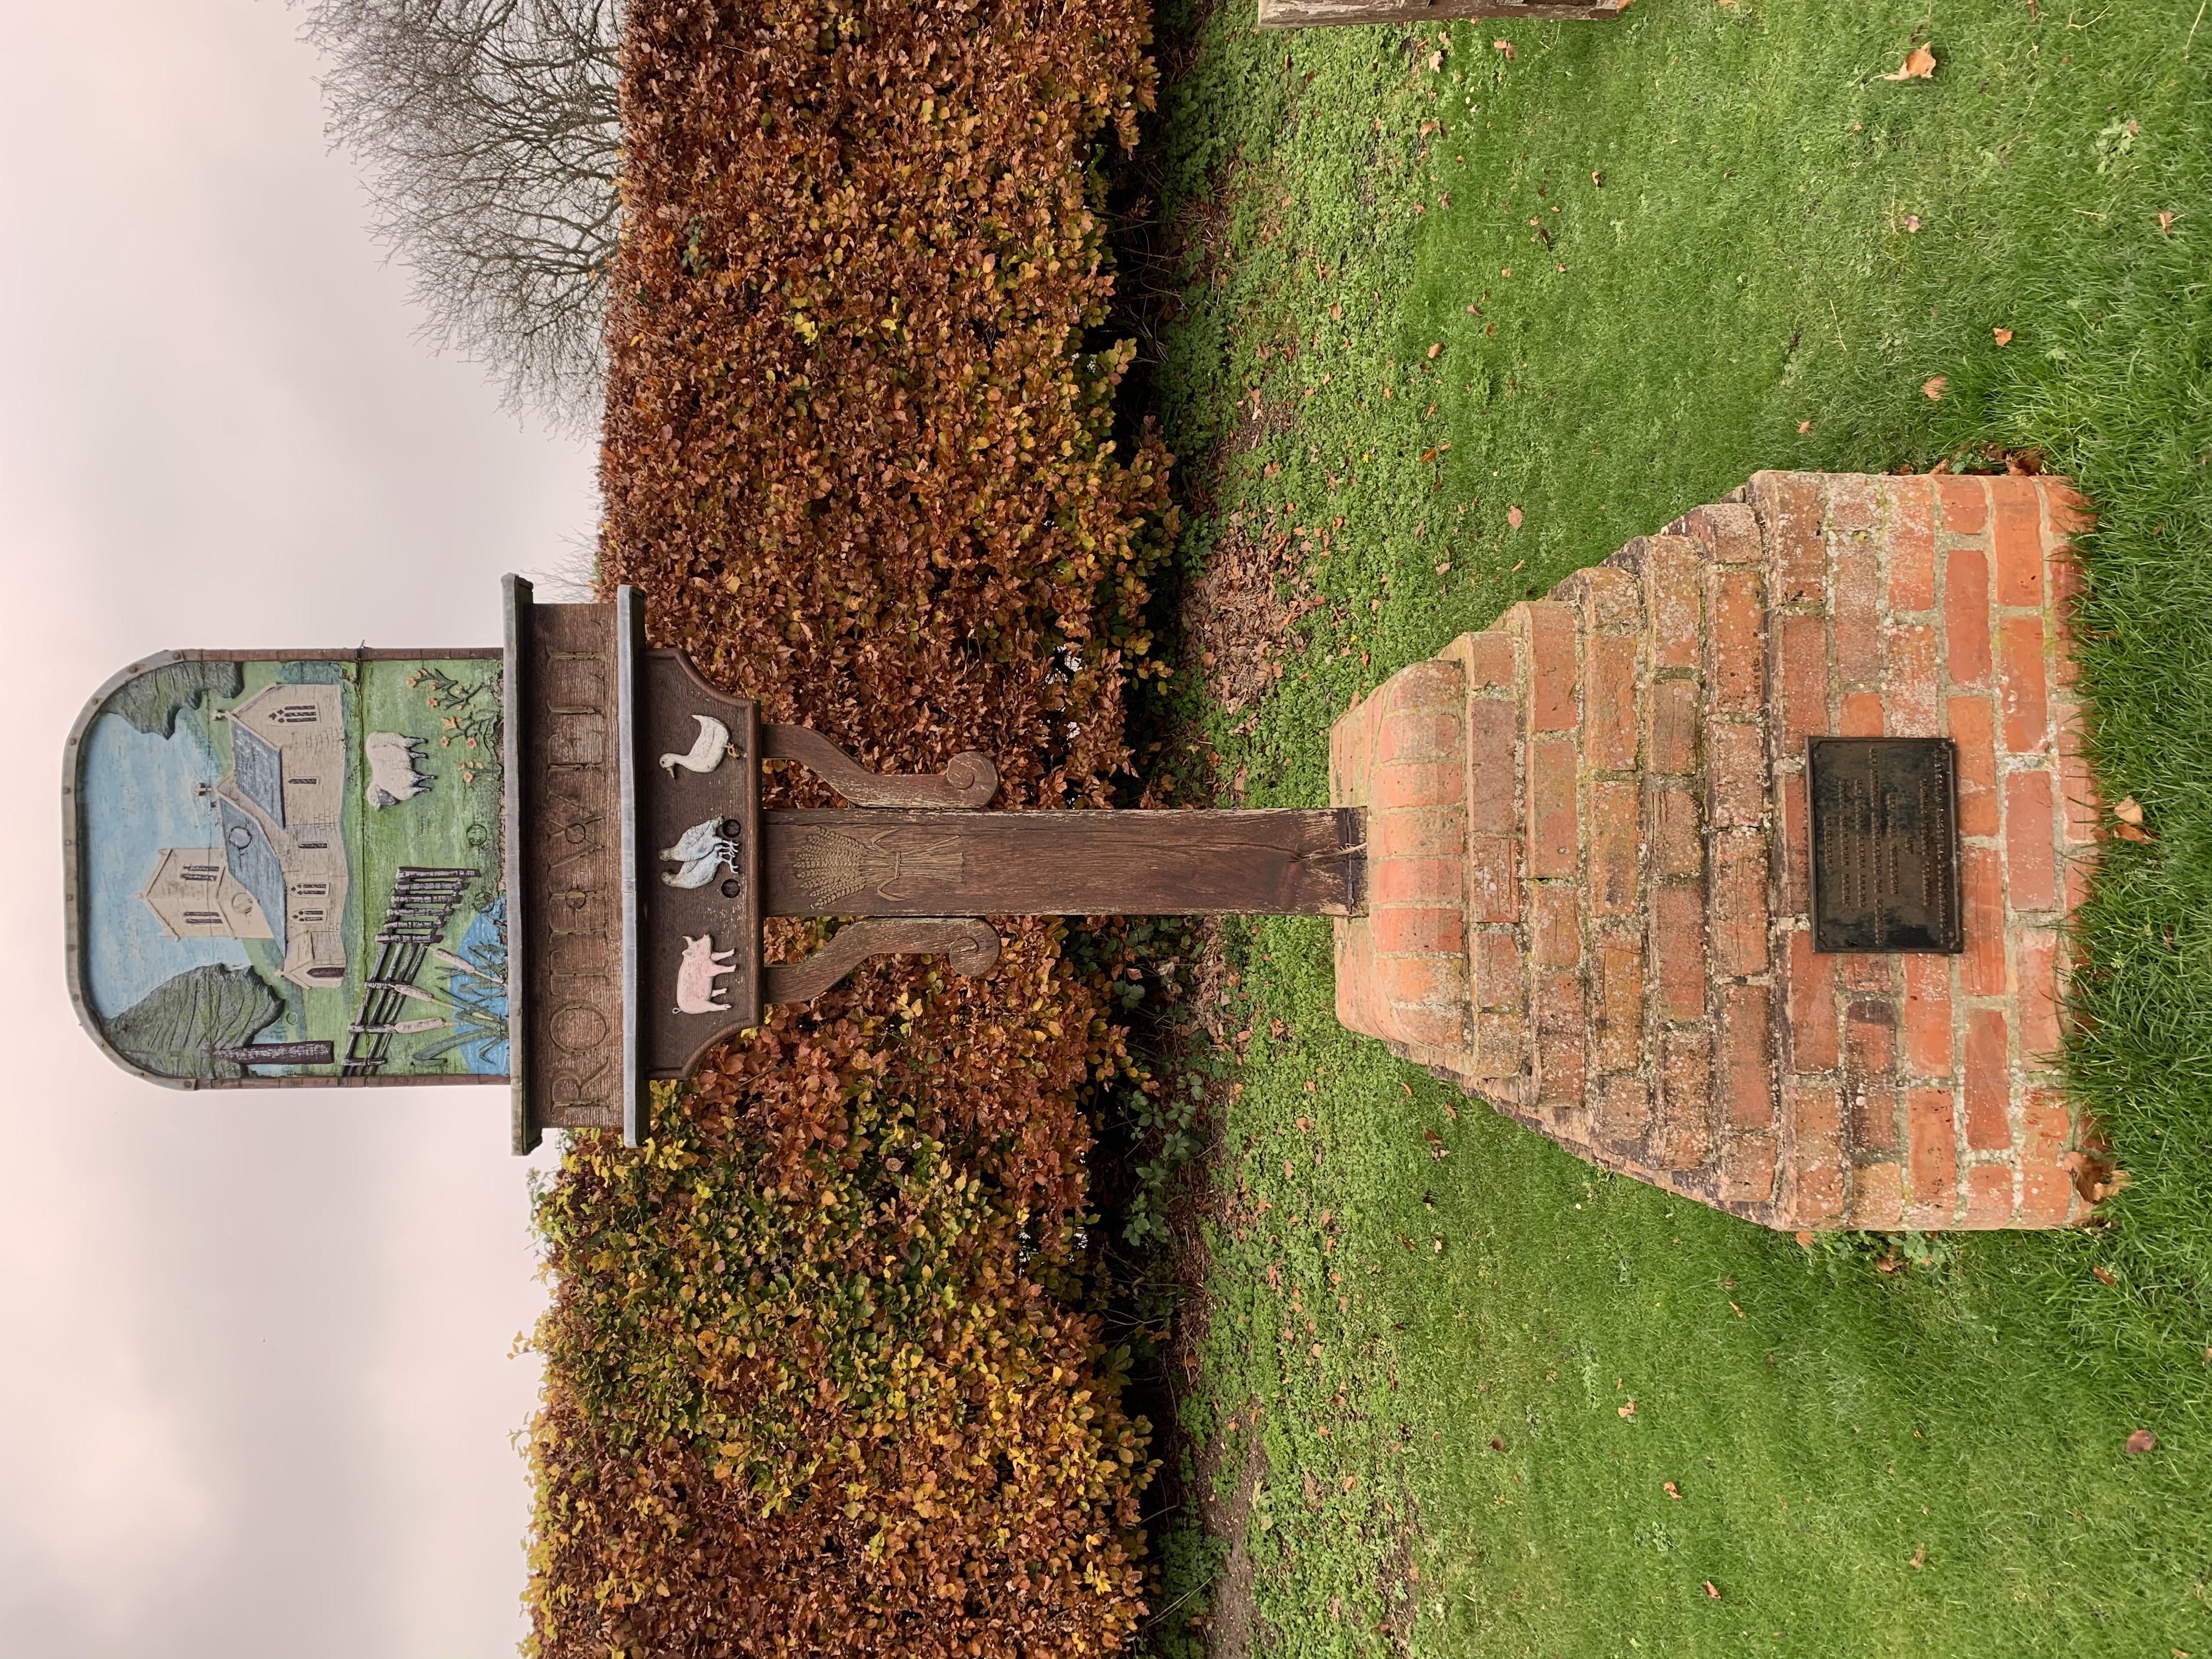 A picture of the village sign